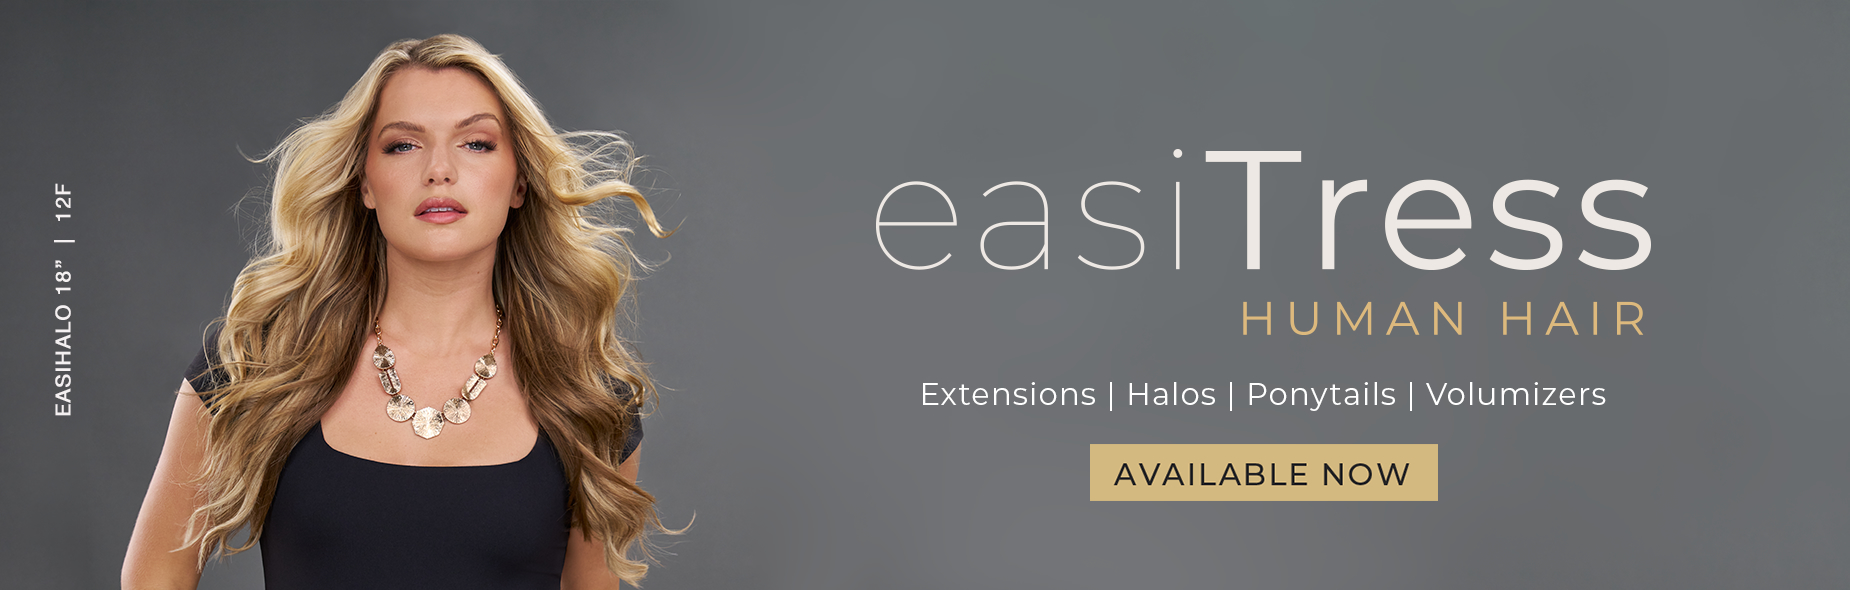 EasiTress Human Hair Available Now!